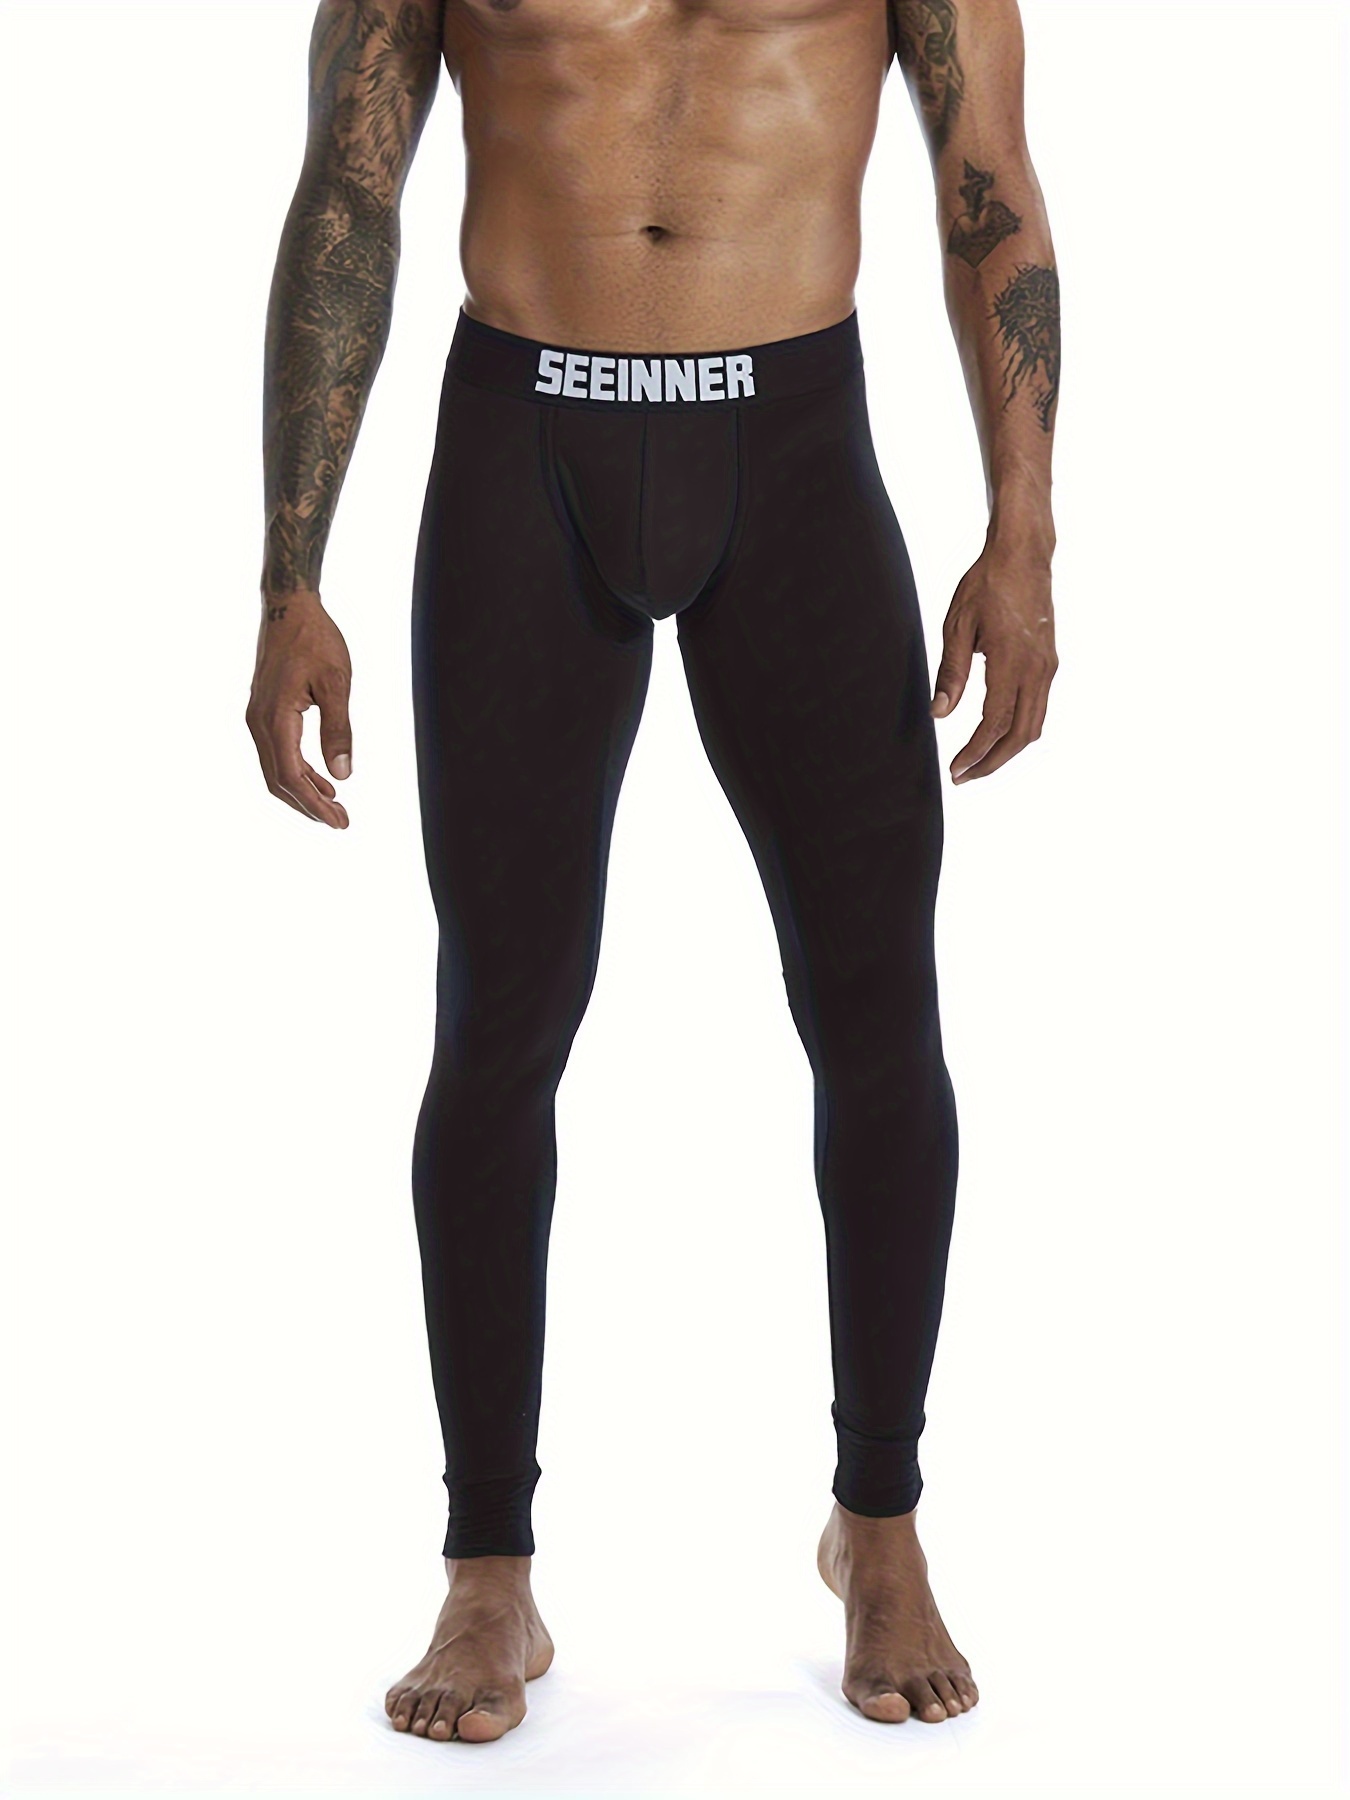 Mens One Leg Leggings, 3/4 Compression Pants, Base Layer Legging Tights  Wick Sweat Away Quickly for Outdoor Sports 